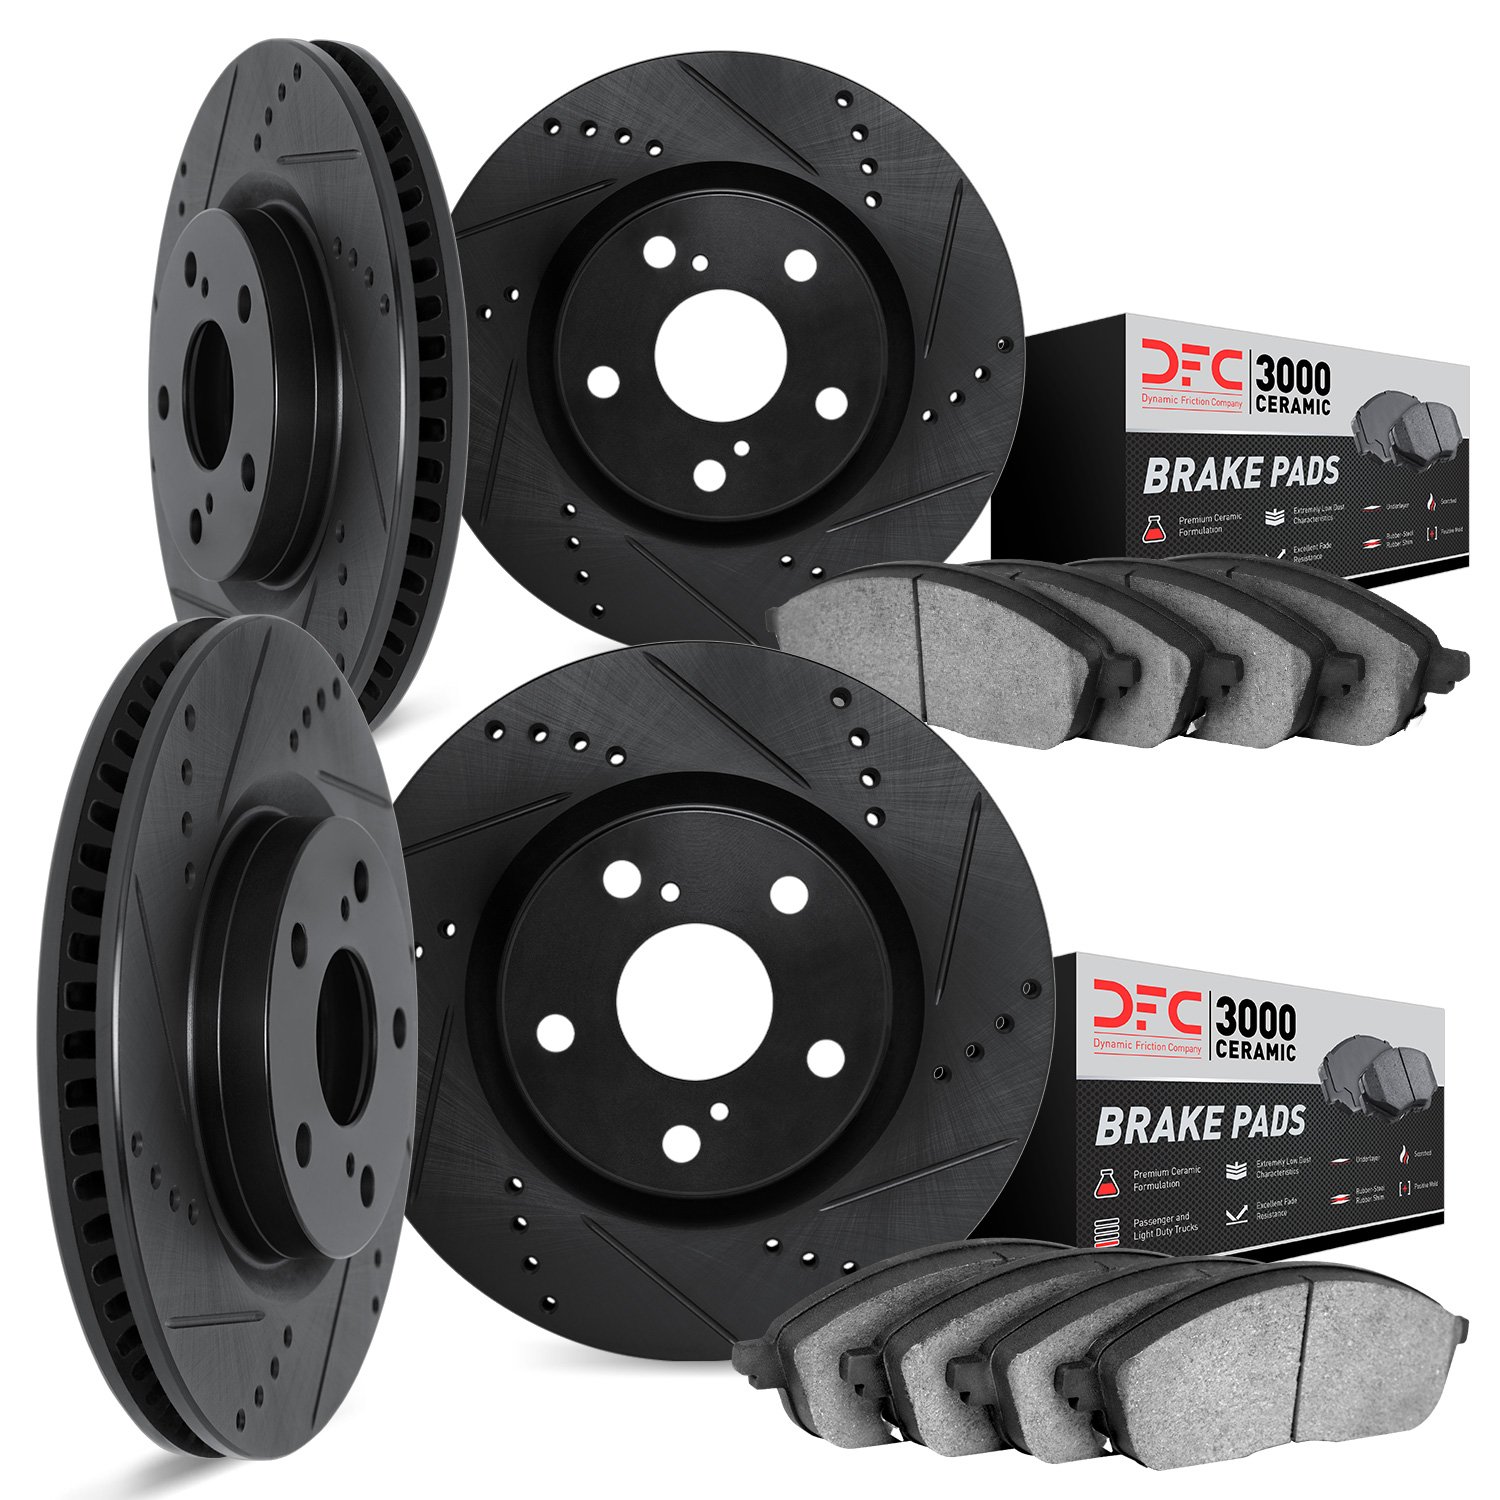 8304-47004 Drilled/Slotted Brake Rotors with 3000-Series Ceramic Brake Pads Kit [Black], 1977-1977 GM, Position: Front and Rear